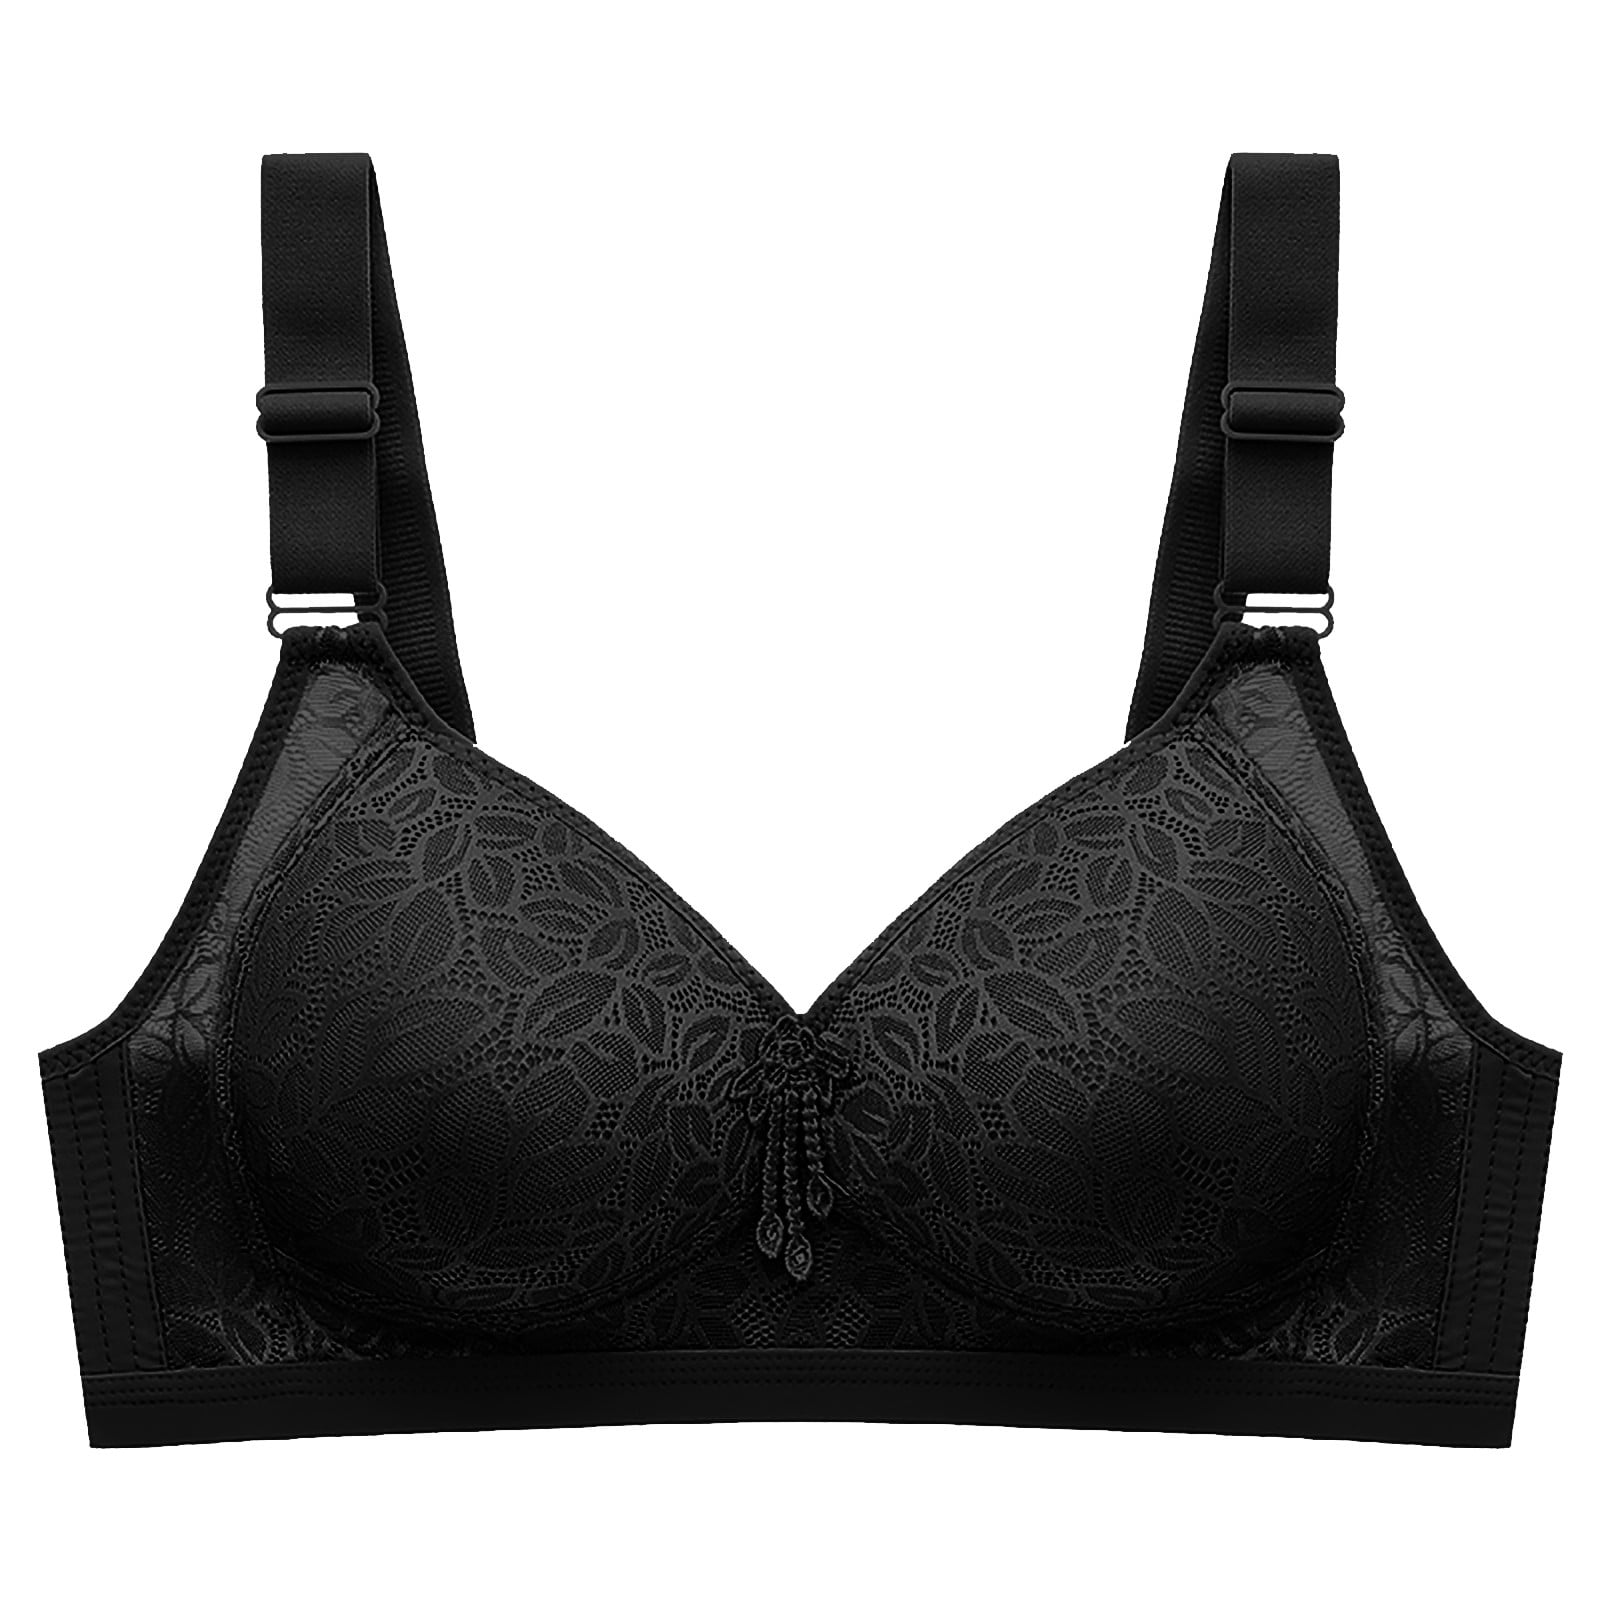 Backless Bra,Lace Minimizer Bras For Women Full Coverage Unlined